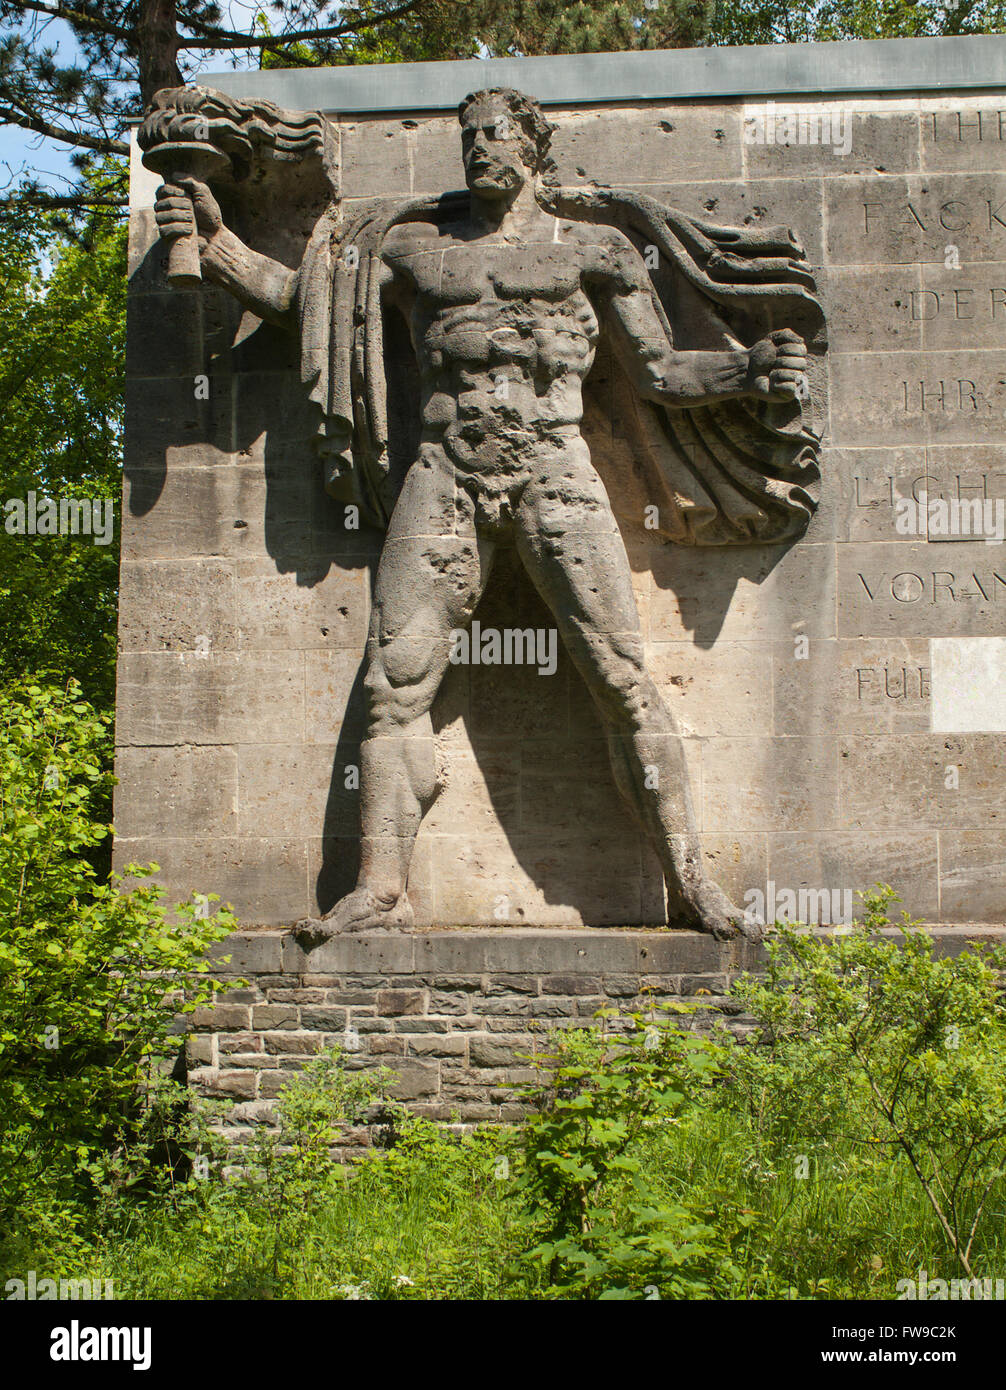 Sculpture torchbearer, representation of the Aryan master race Herrenmensch, Ordensburg Vogelsang, educational centre of the Stock Photo